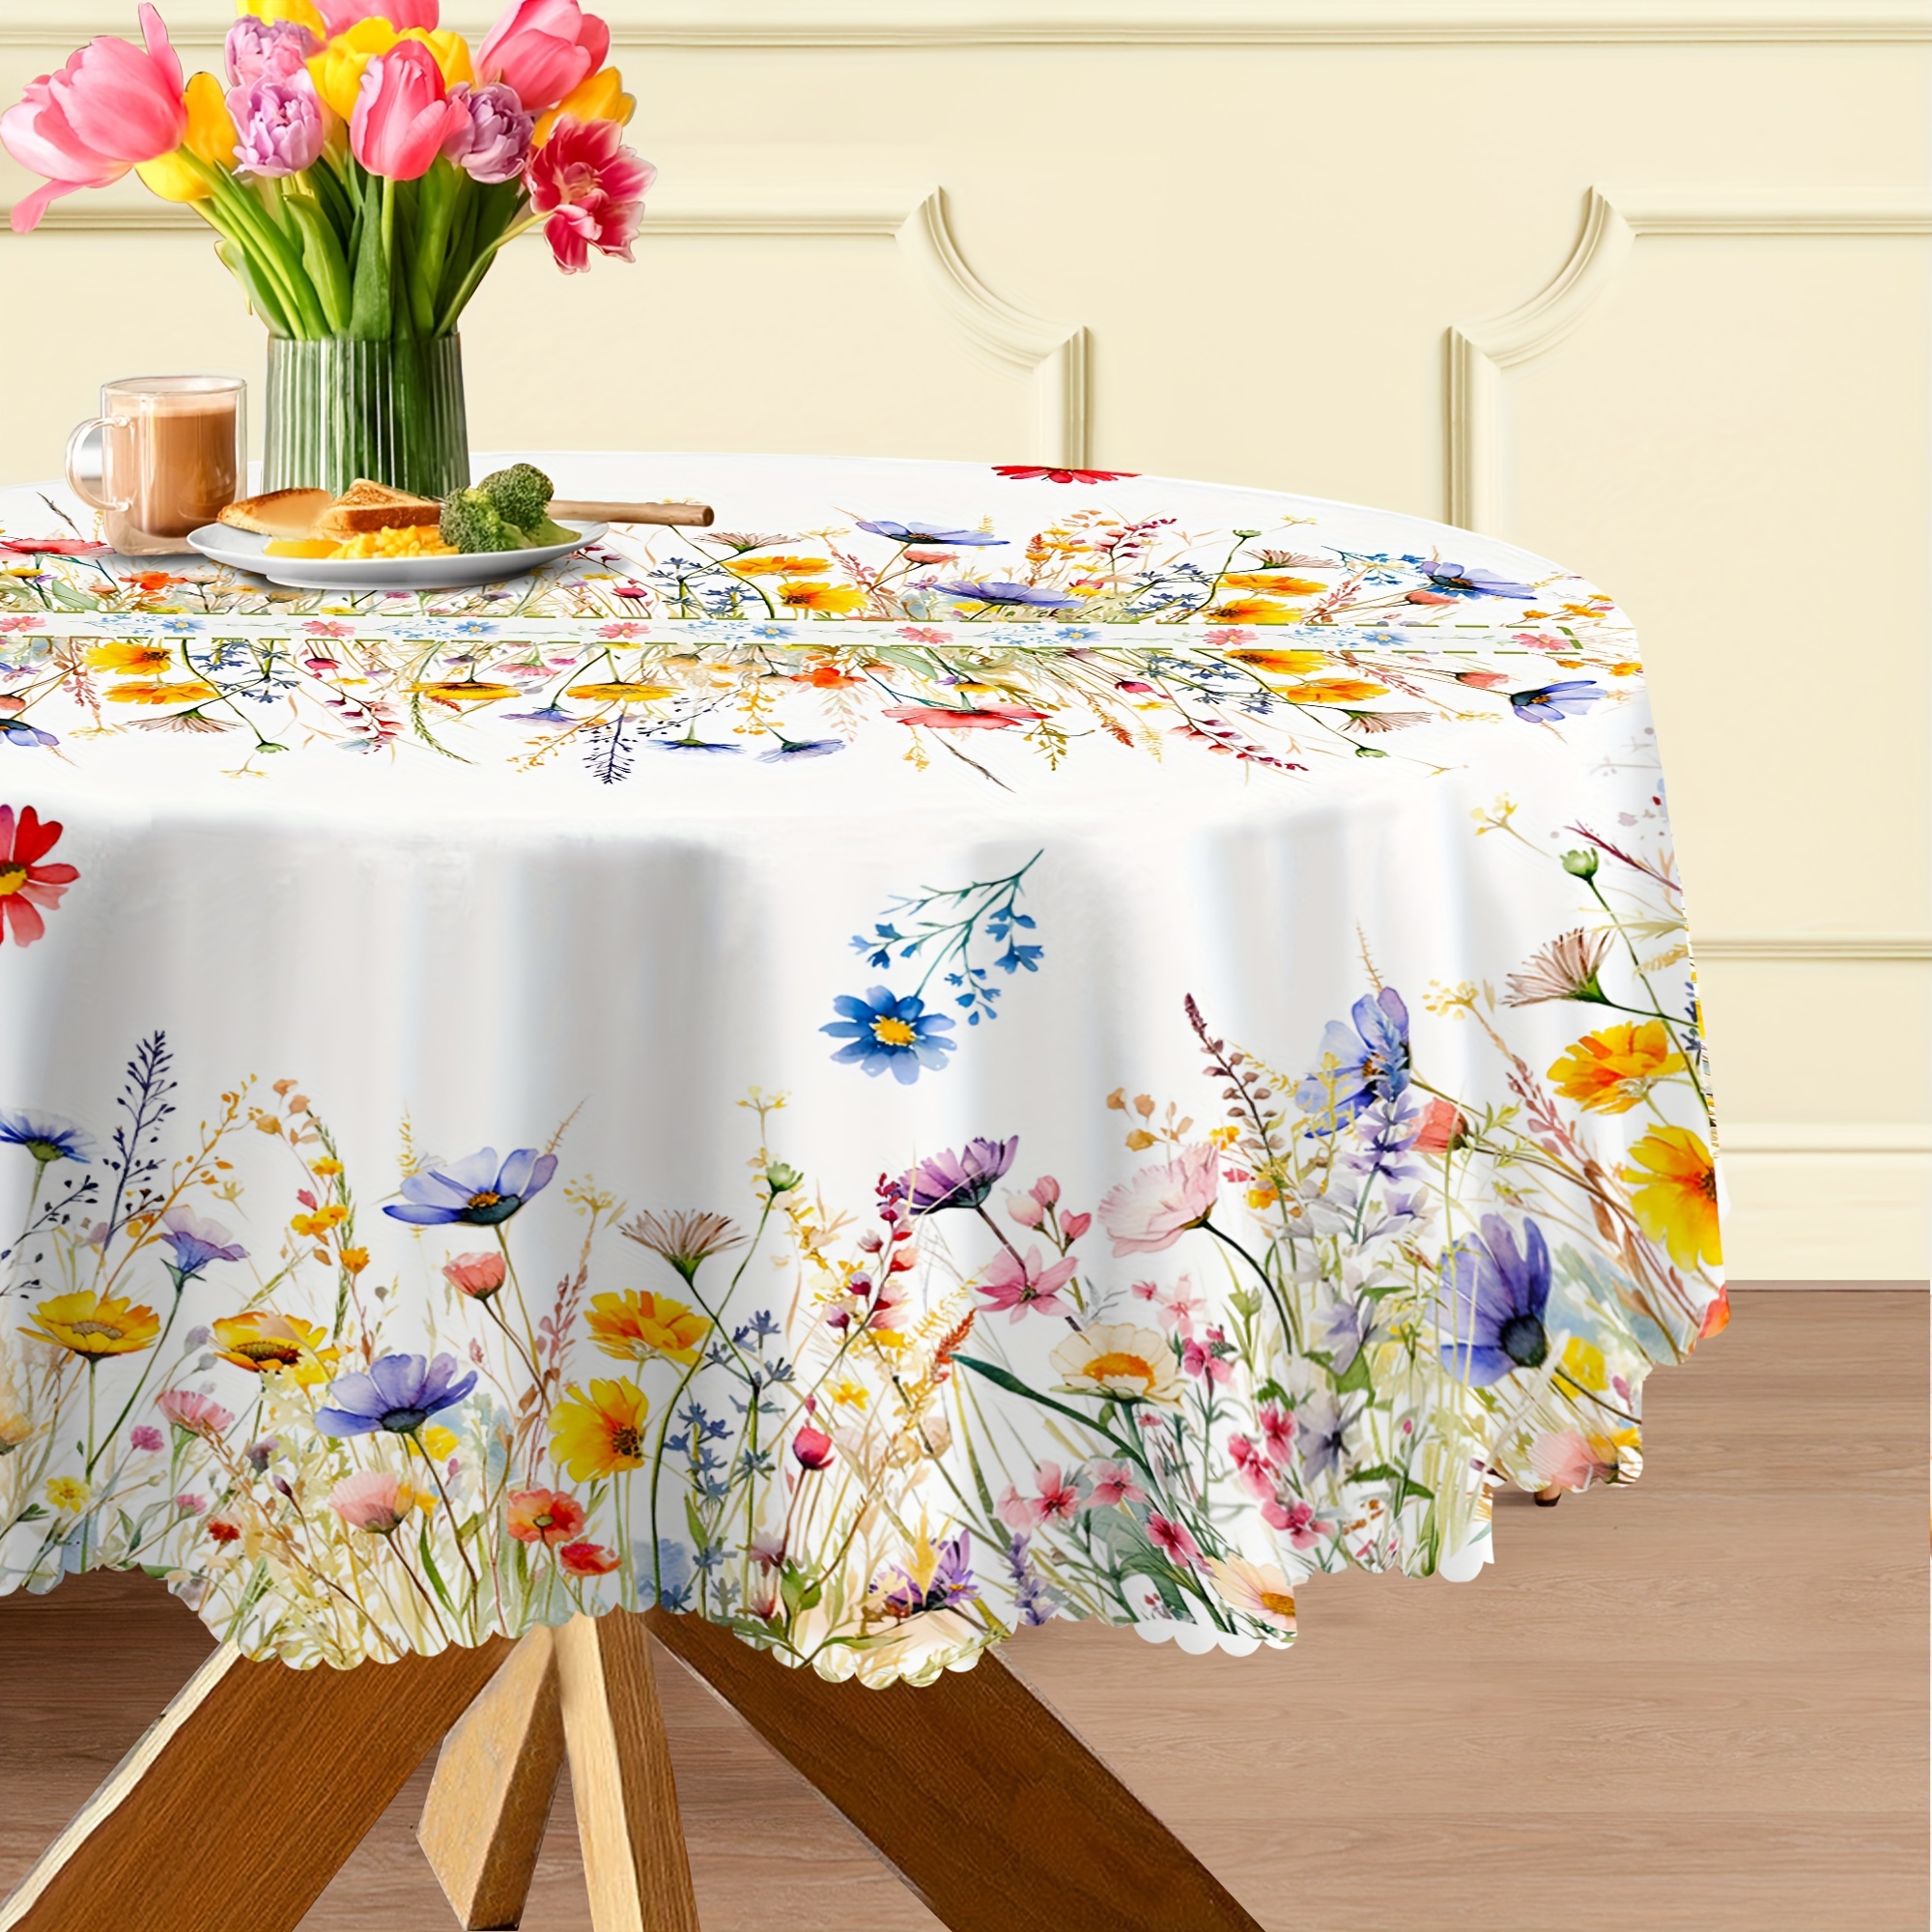 

1pc, Tablecloth, Small Fresh Style Pastoral Wheat Design Table Decor, Round Colorful Floral Butterfly Pattern Table Cover, For Picnic Or Holiday Party, Room Decor